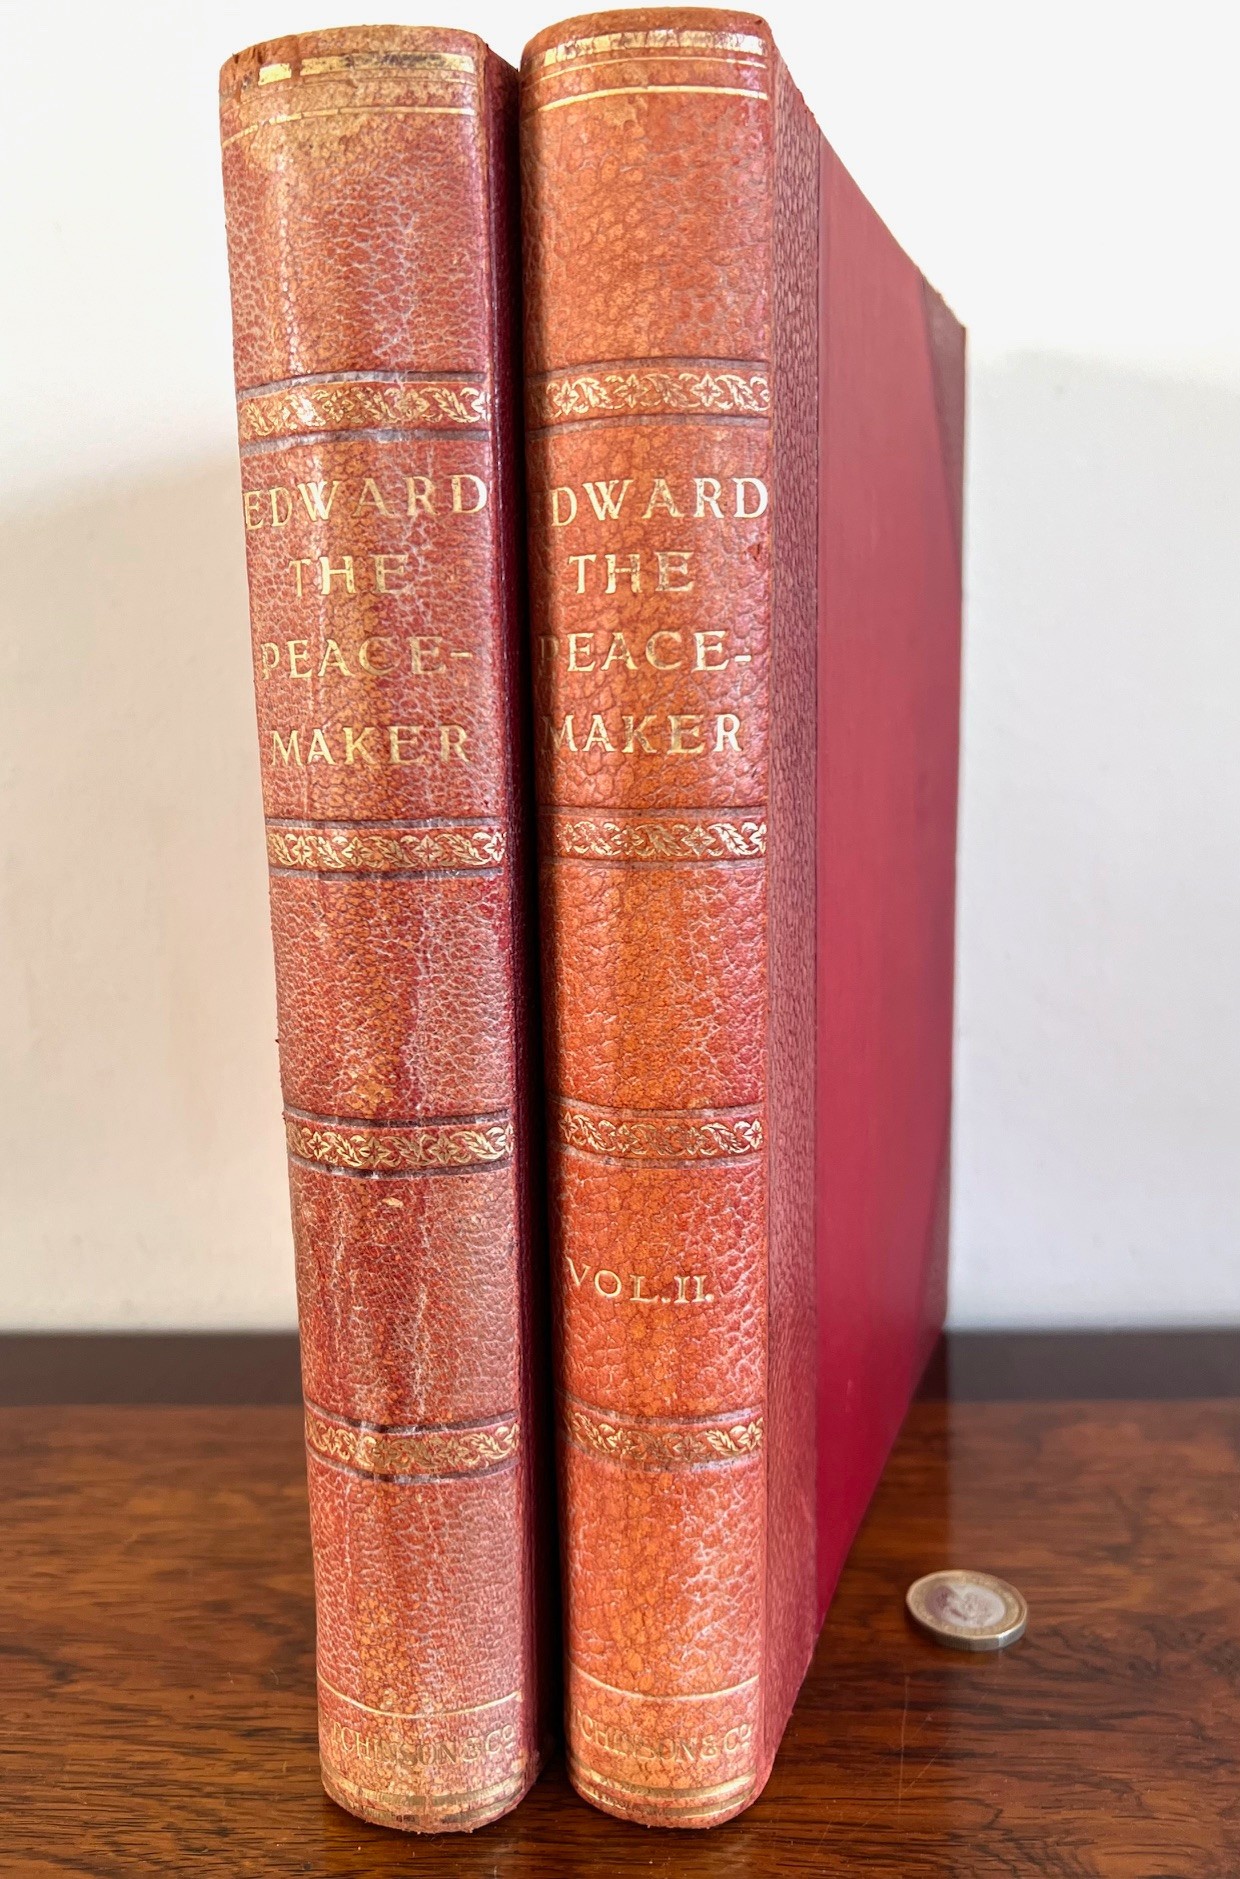 WILKINS, TWO VOLUMES, EDWARD THE PEACE MAKER, QUARTER LEATHER BOUND - Image 3 of 3